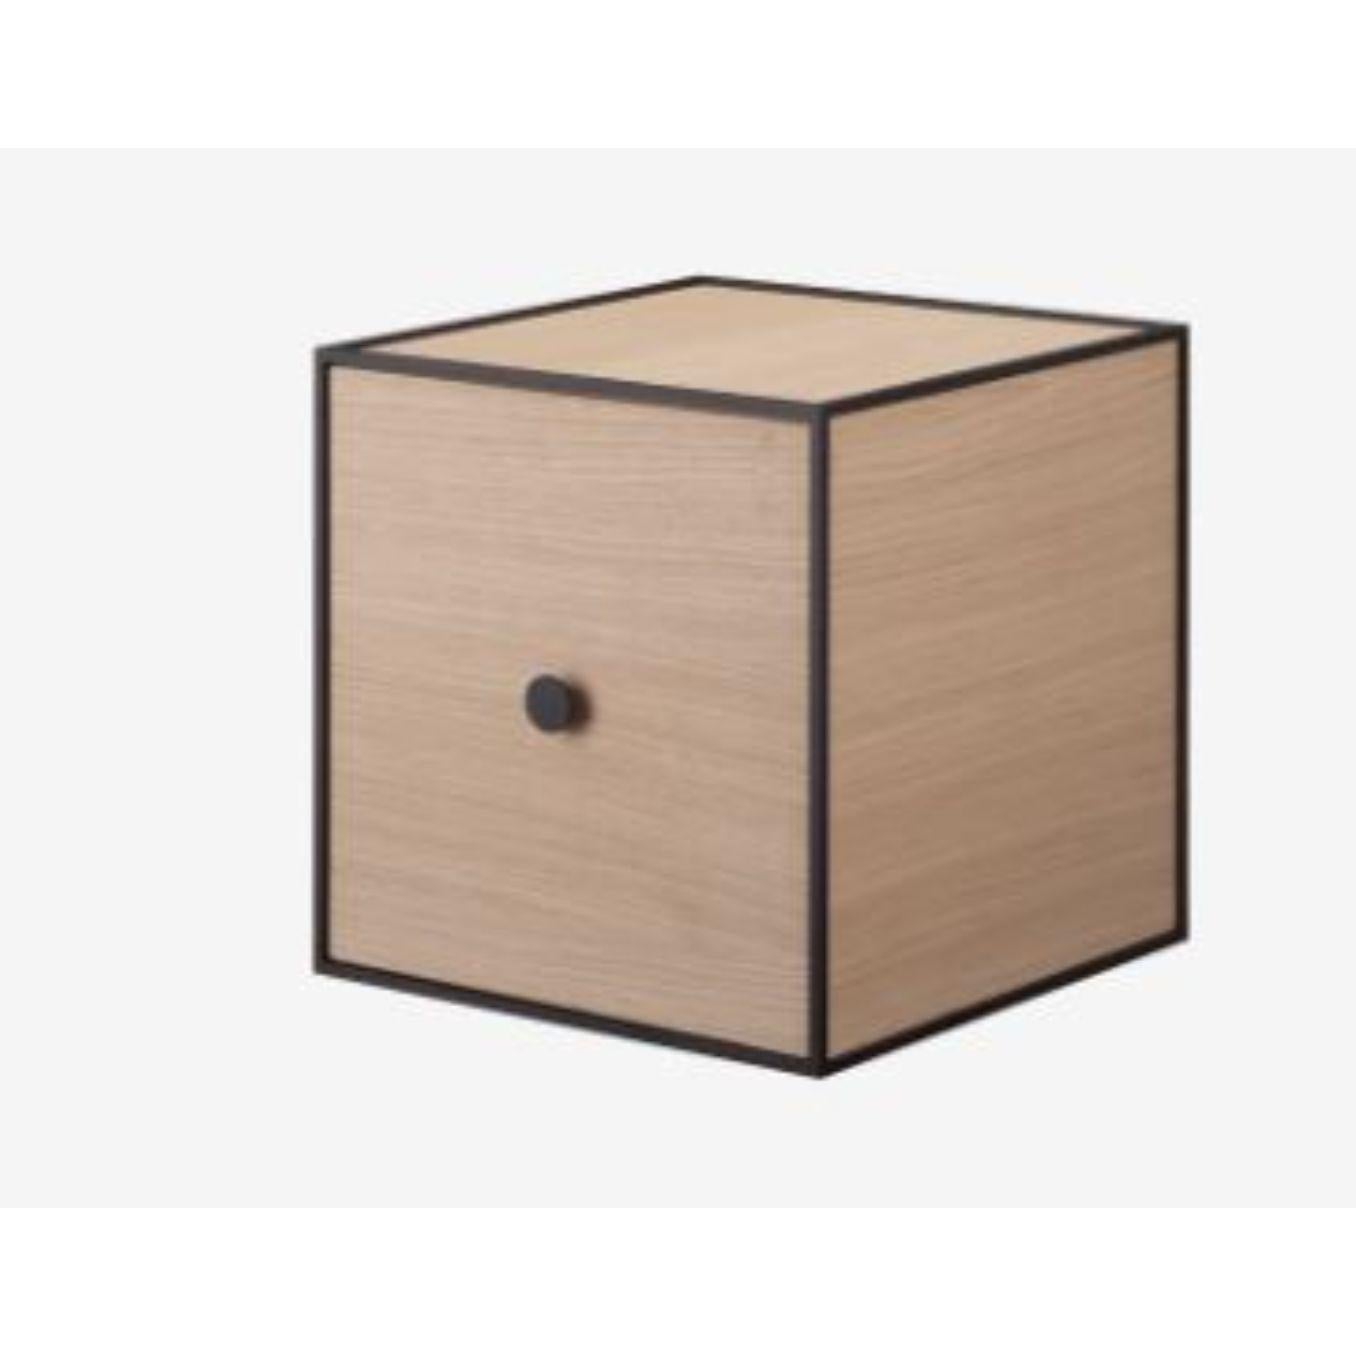 28 oak frame box with door by Lassen
Dimensions: W 28 x D 28 x H 28 cm 
Materials: Finér, melamin, melamin, melamine, metal, veneer, oak.
Also available in different colors and dimensions. 

By Lassen is a Danish design brand focused on iconic